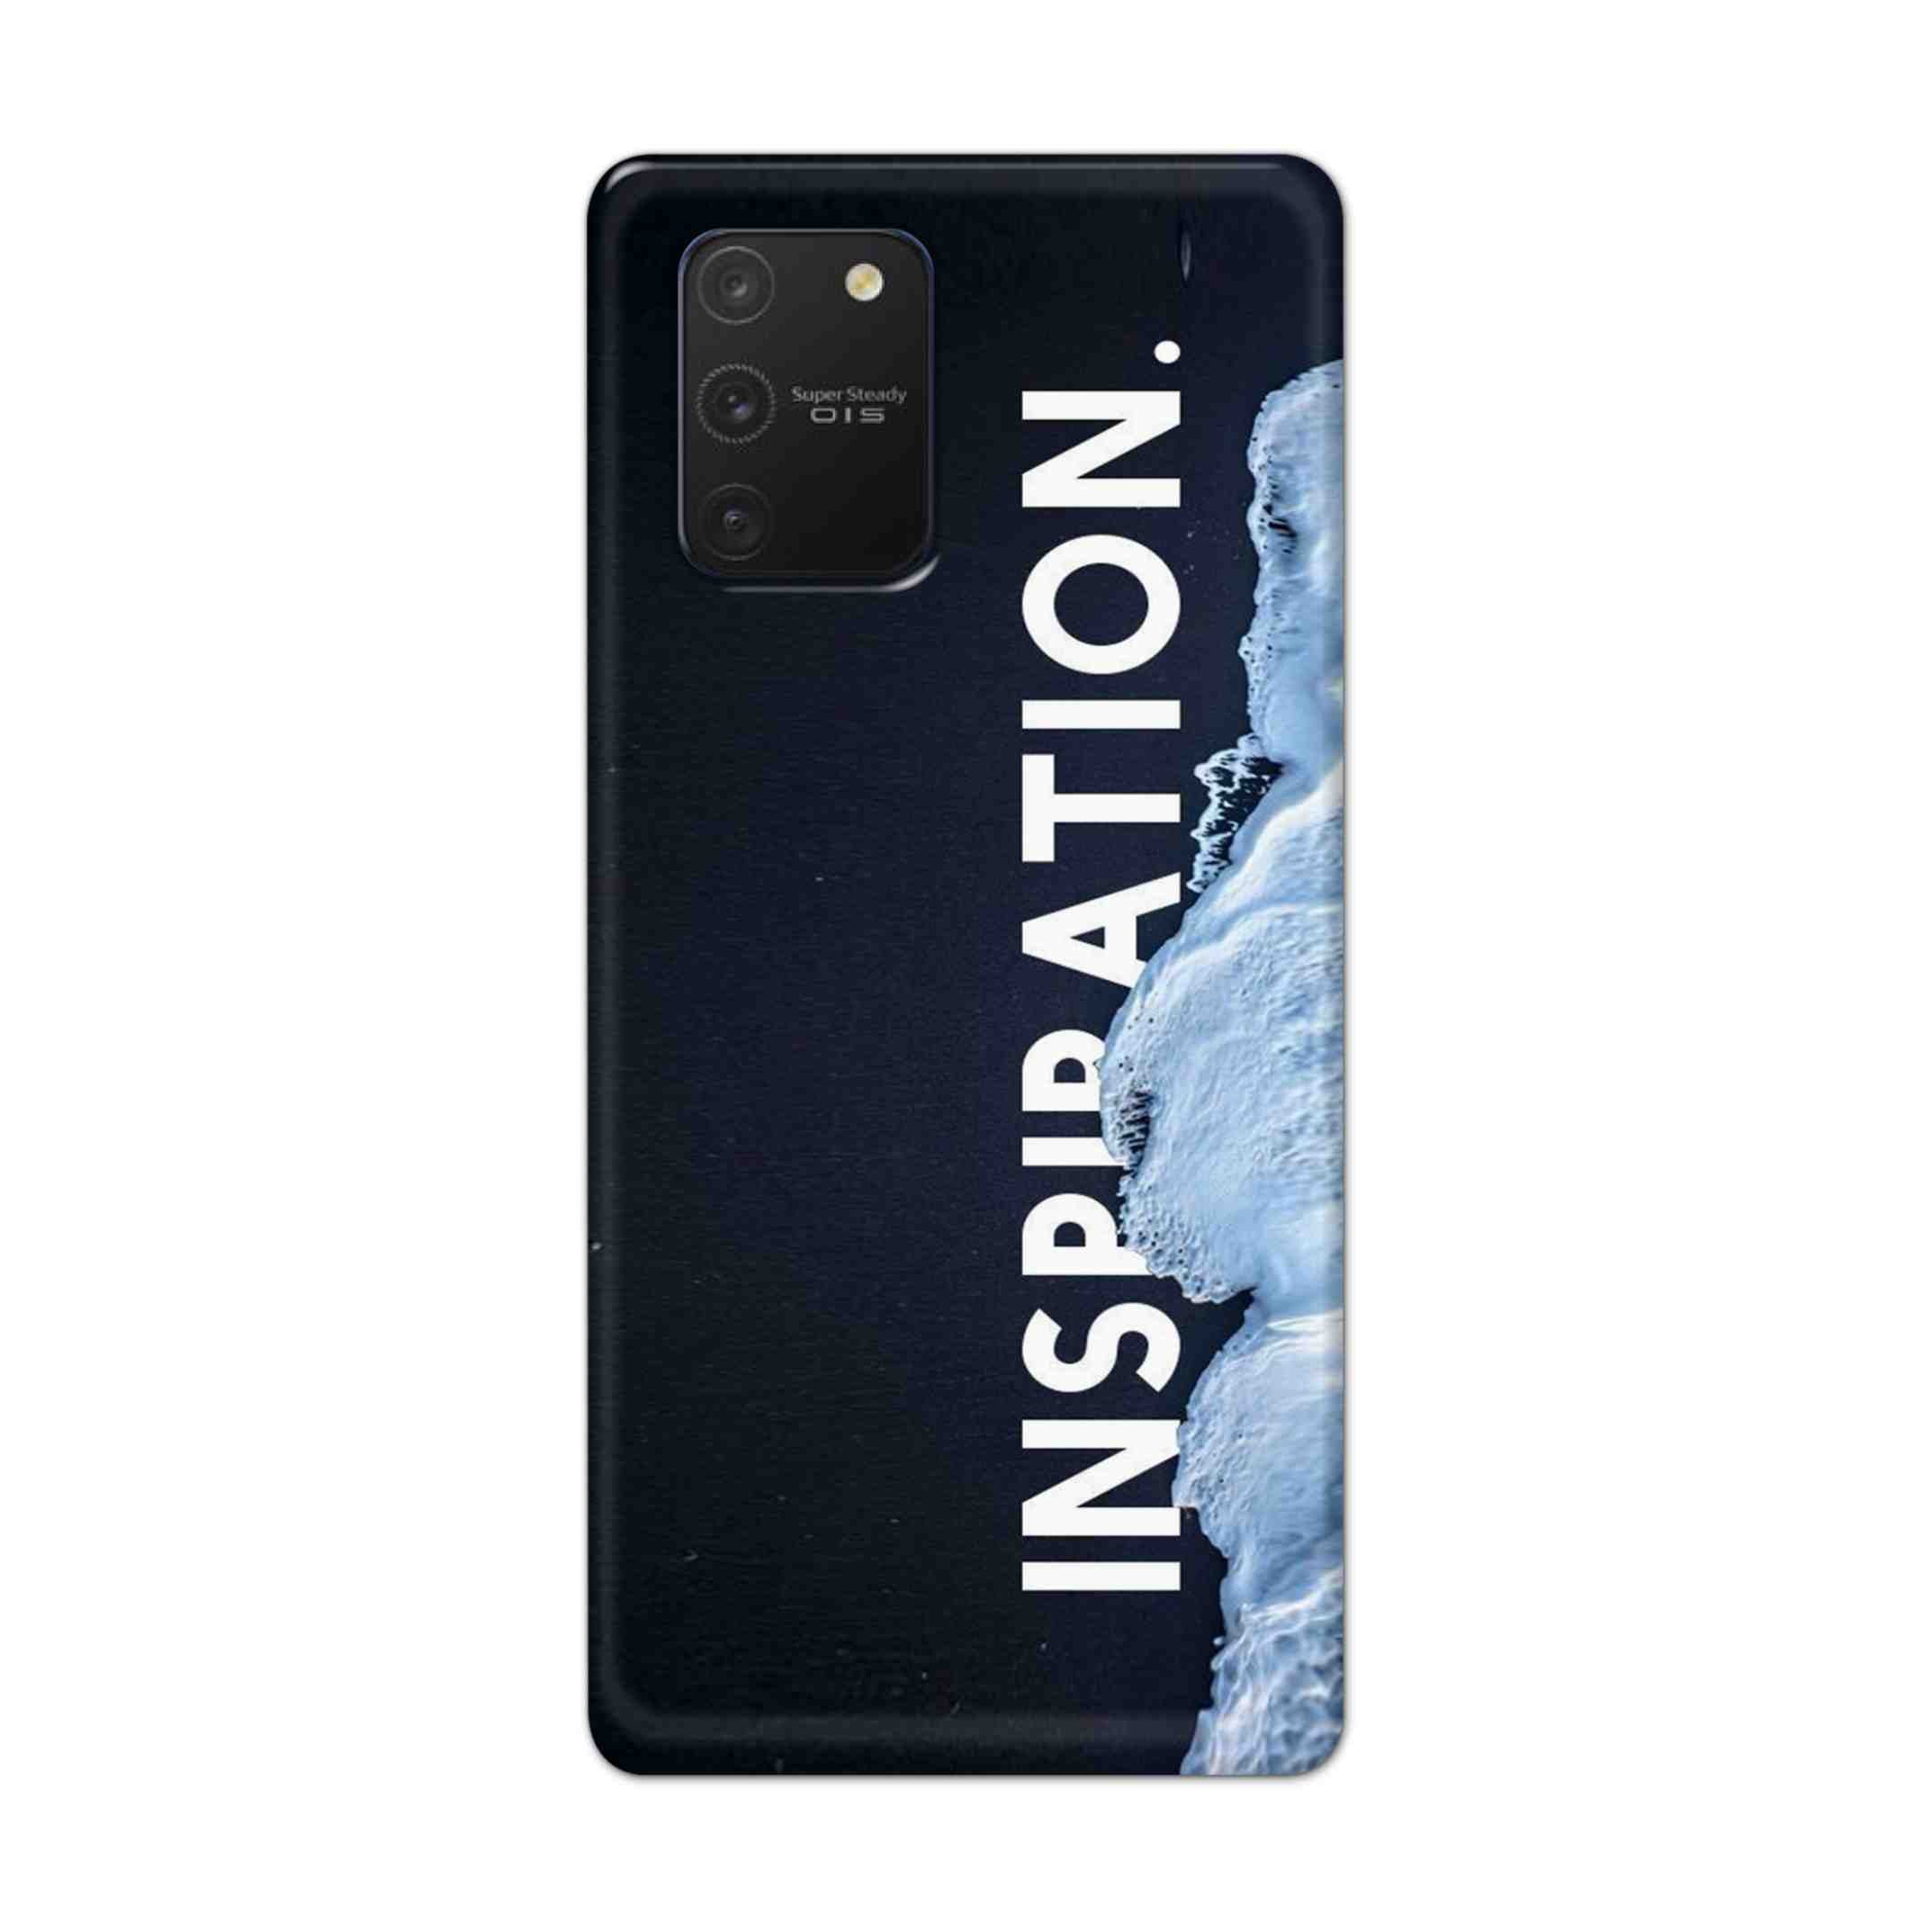 Buy Inspiration Hard Back Mobile Phone Case Cover For Samsung Galaxy S10 Lite Online